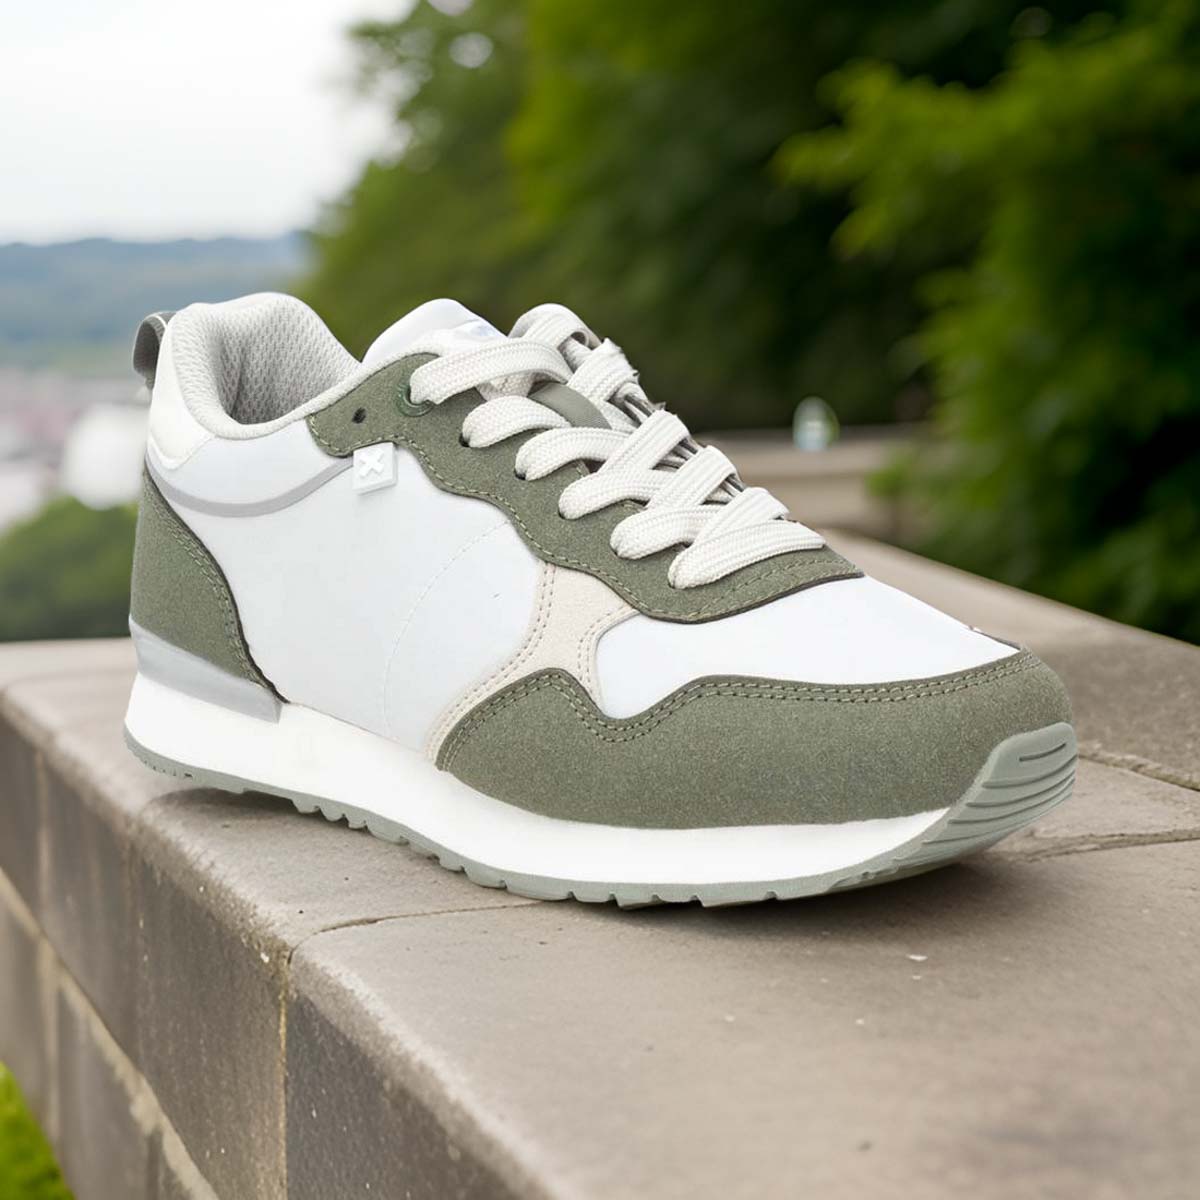     Front view of XTI Vegan Certified Runners in white, olive green, and soft grey.